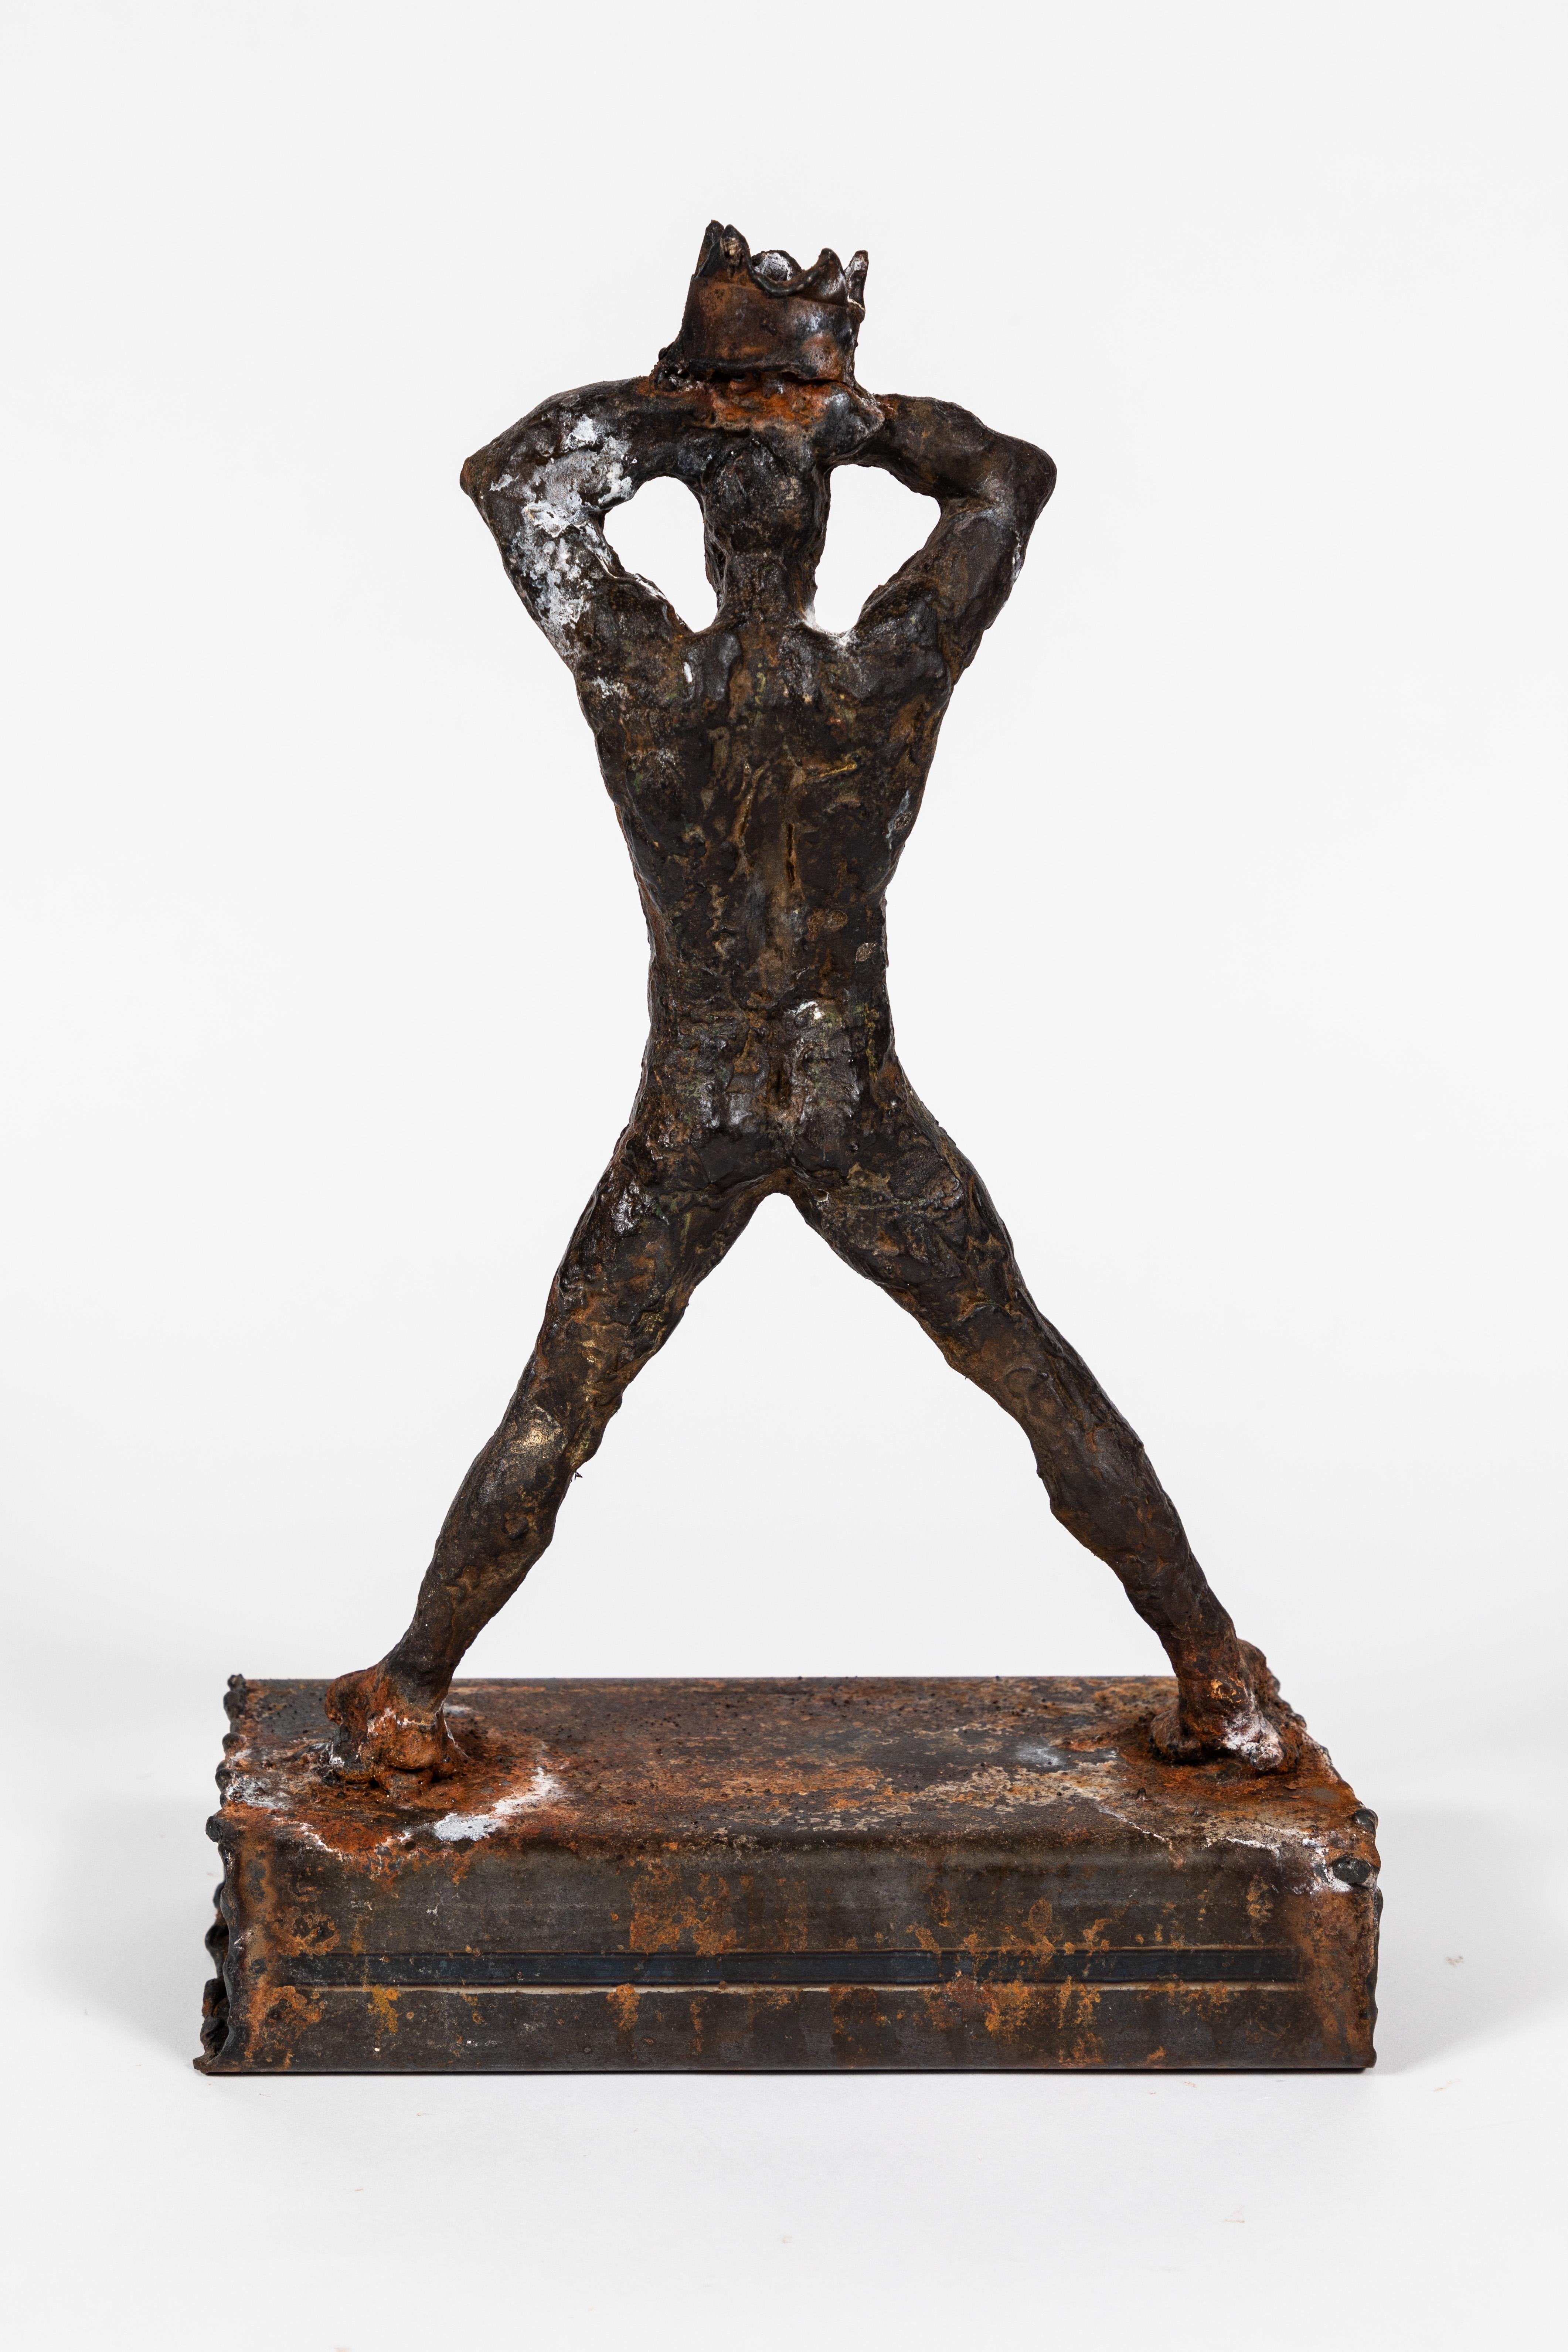 Metal sculpture of a male nude holding a crown, 1990's. Crown detail is reminiscent of a similar design used frequently in the work of Basquiat.